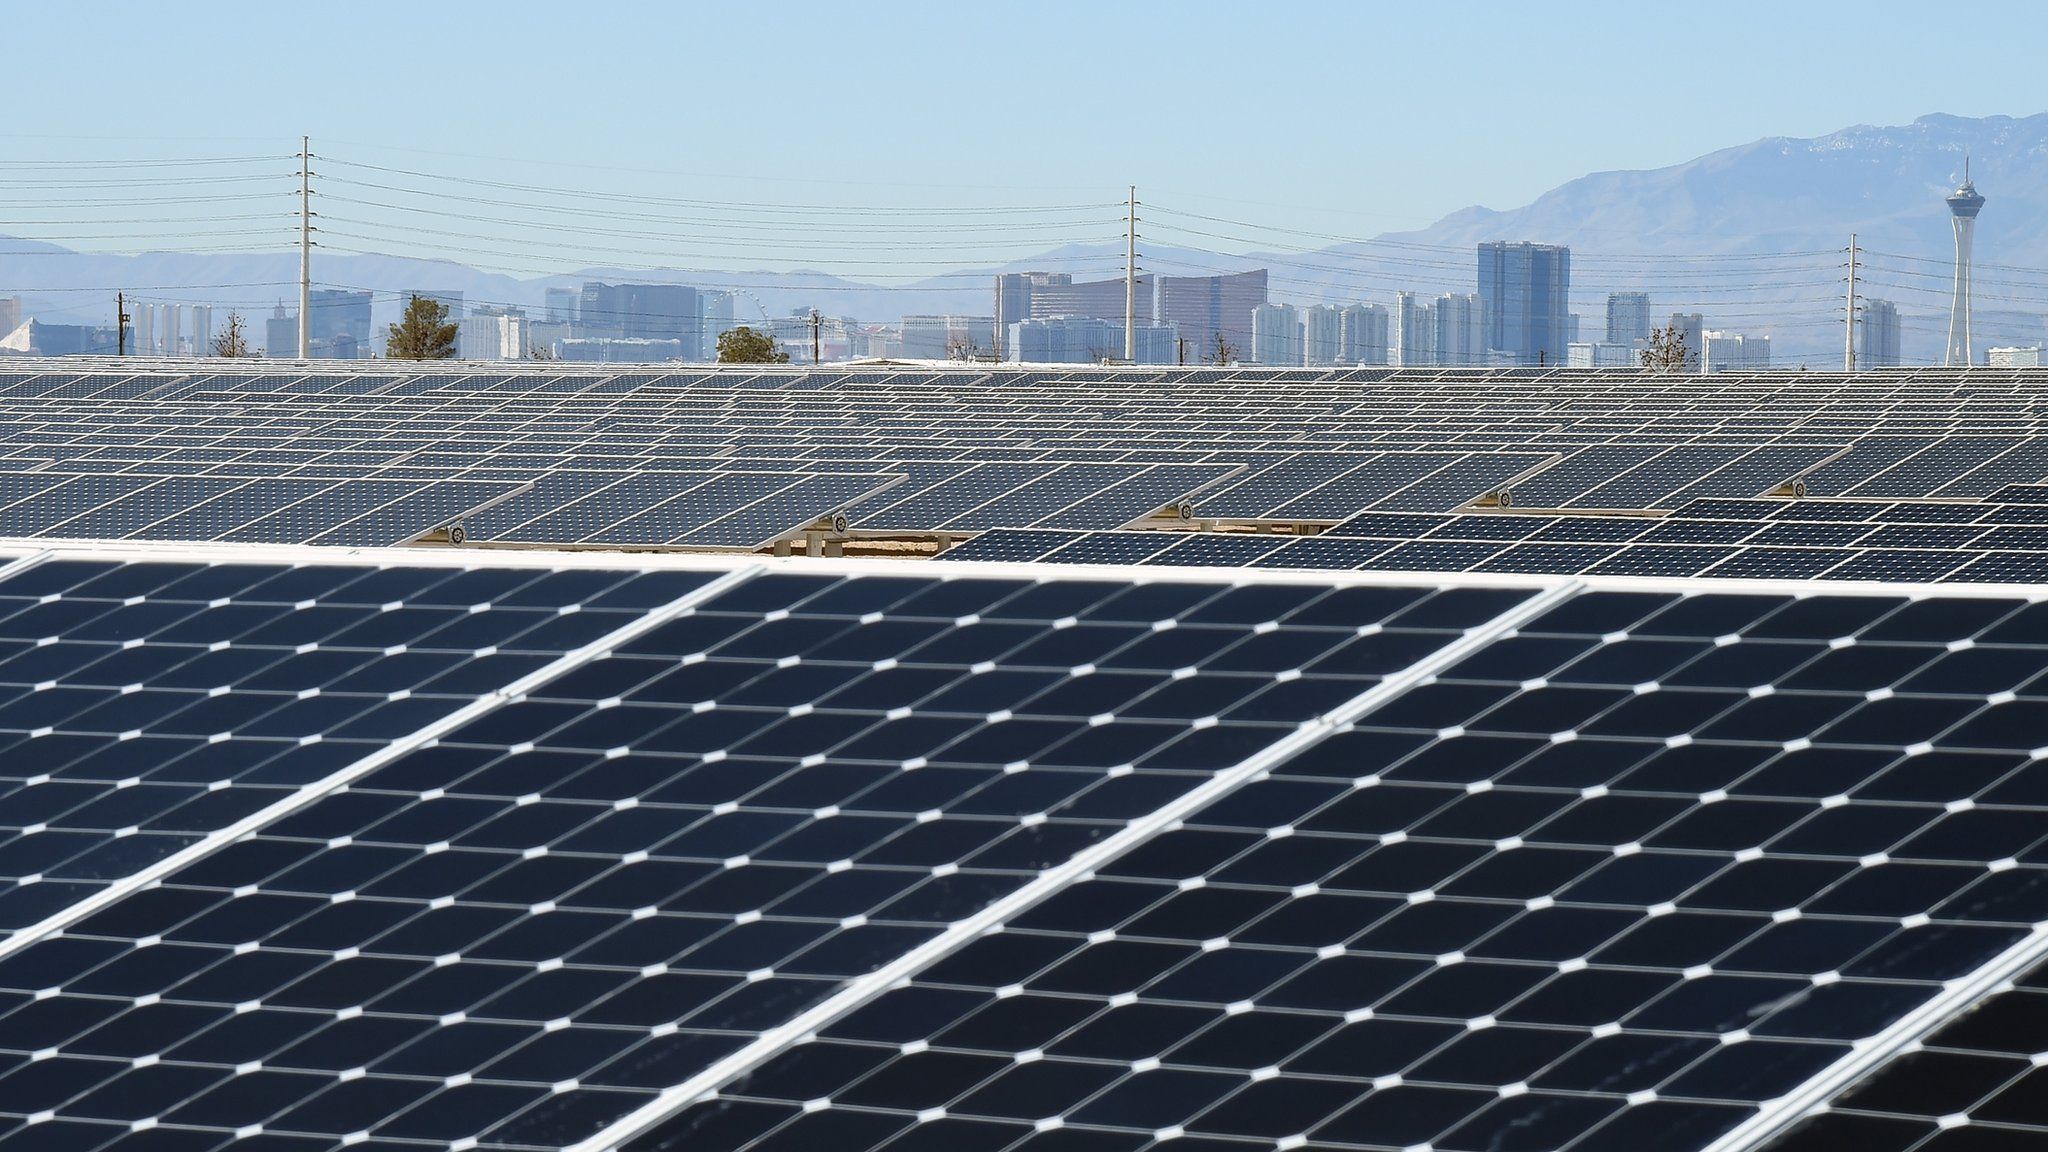 The Las Vegas Strip is shown behind solar panels during a dedication ceremony to commemorate the completion of the 102-acre, 15-megawatt Solar Array II Generating Station at Nellis Air Force Base on February 16, 2016 in Las Vegas, Nevada.